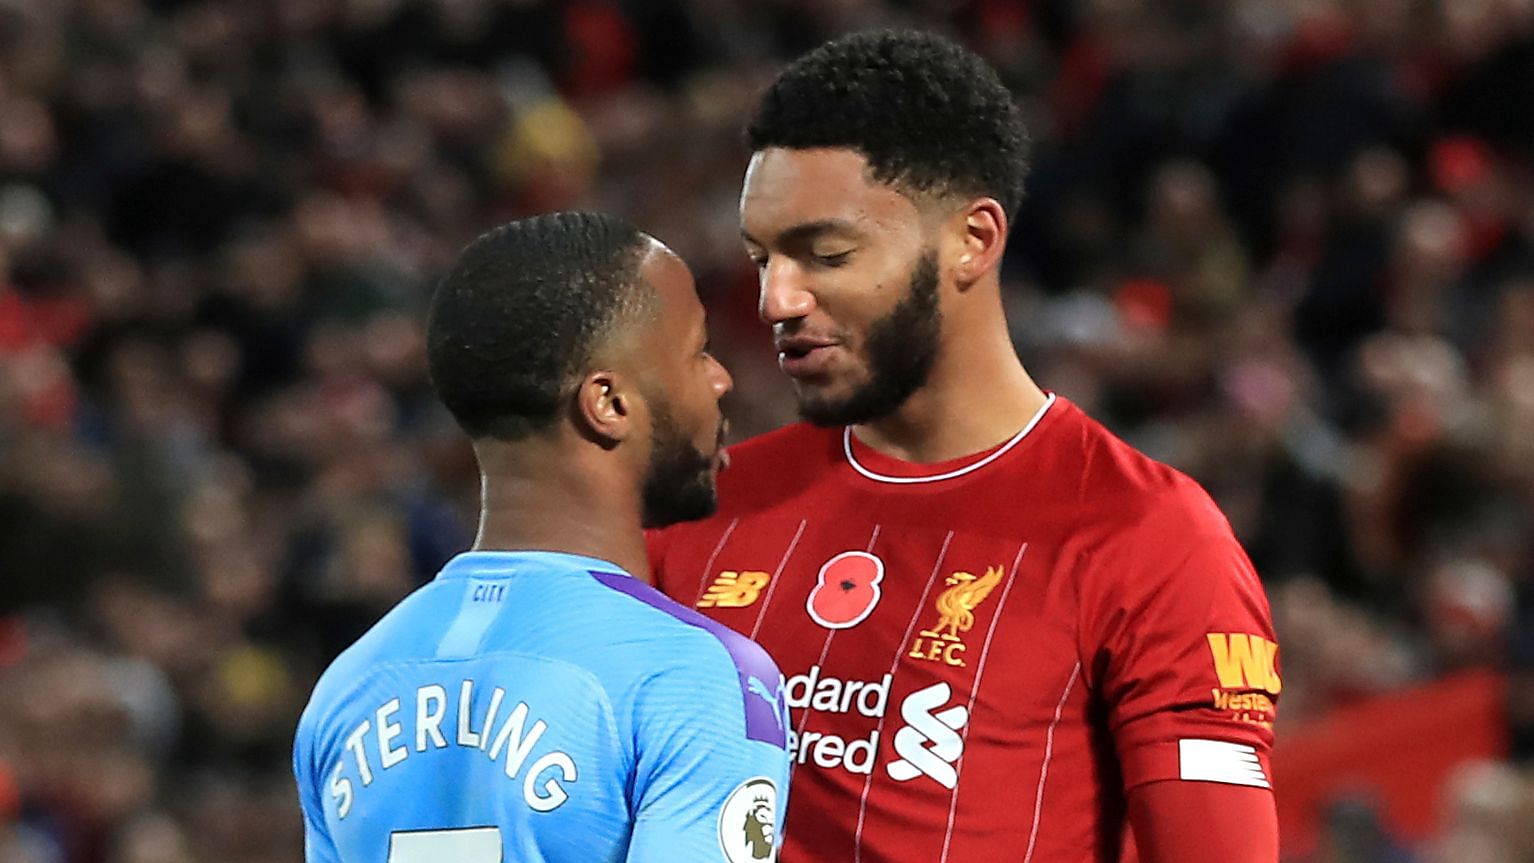 Liverpool’s Joe Gomez, right, and Manchester City’s Raheem Sterling clash during the Premier League soccer match at Anfield, Liverpool.